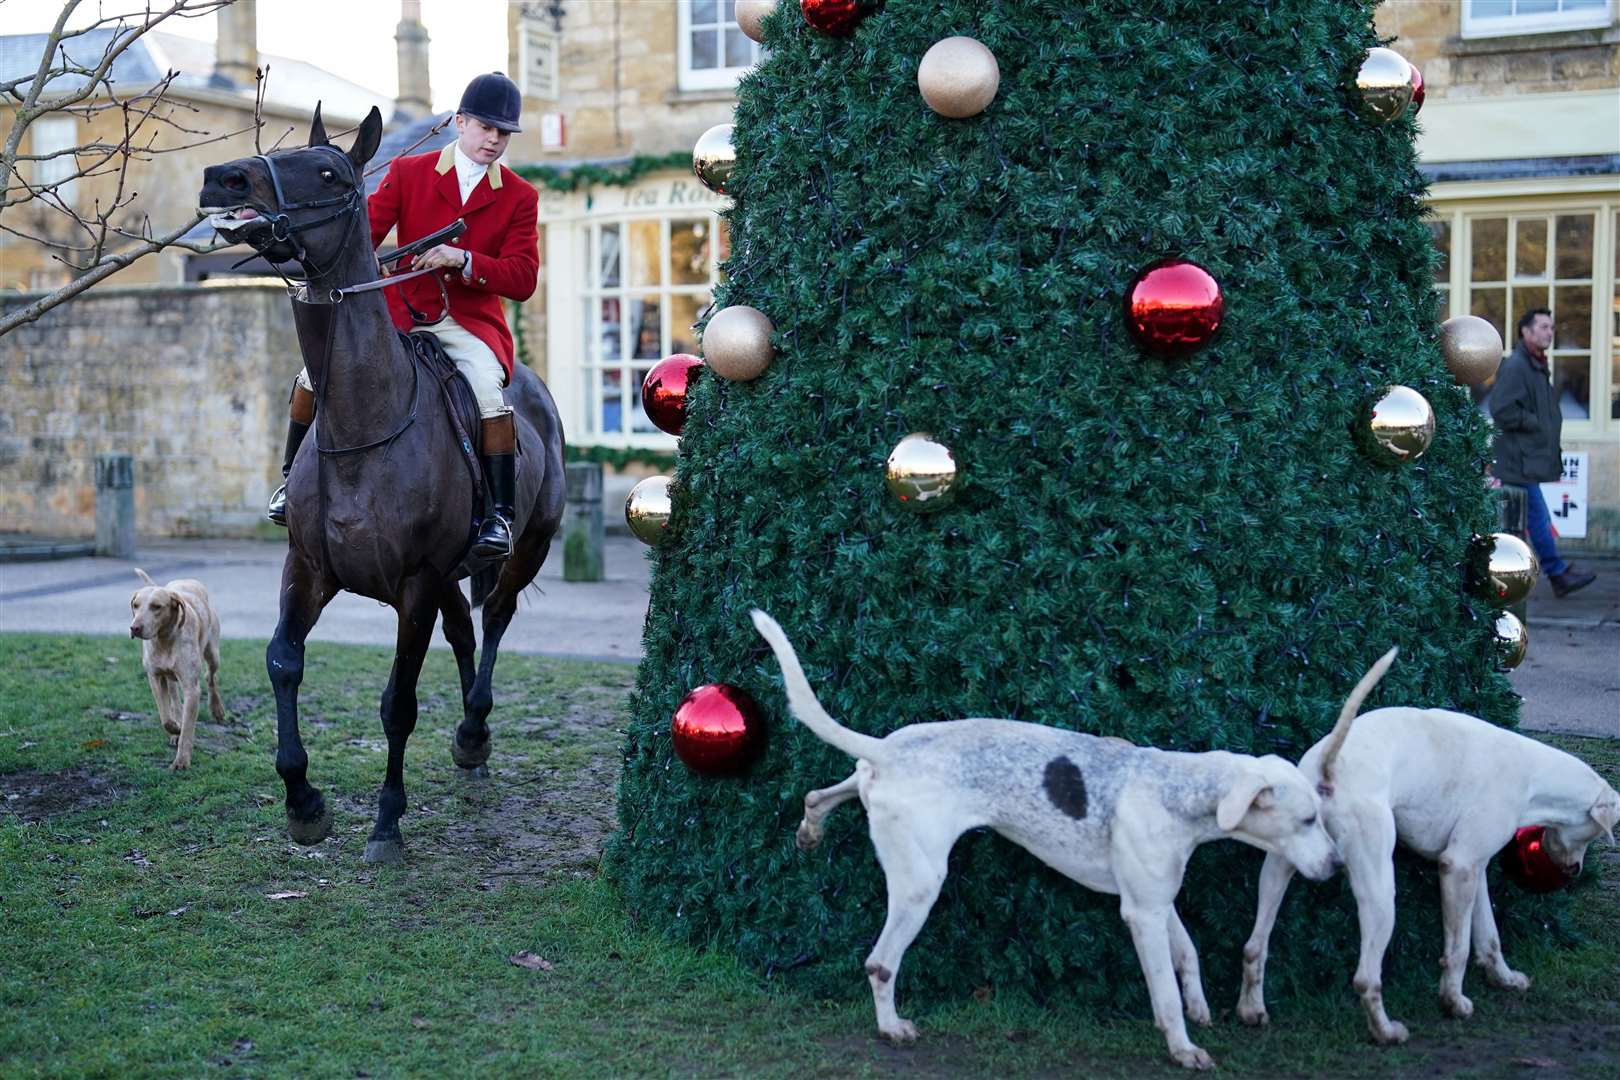 A rider and hounds during the annual North Cotswold Boxing Day hunt in Broadway, Worcestershire (Jacob King/PA)